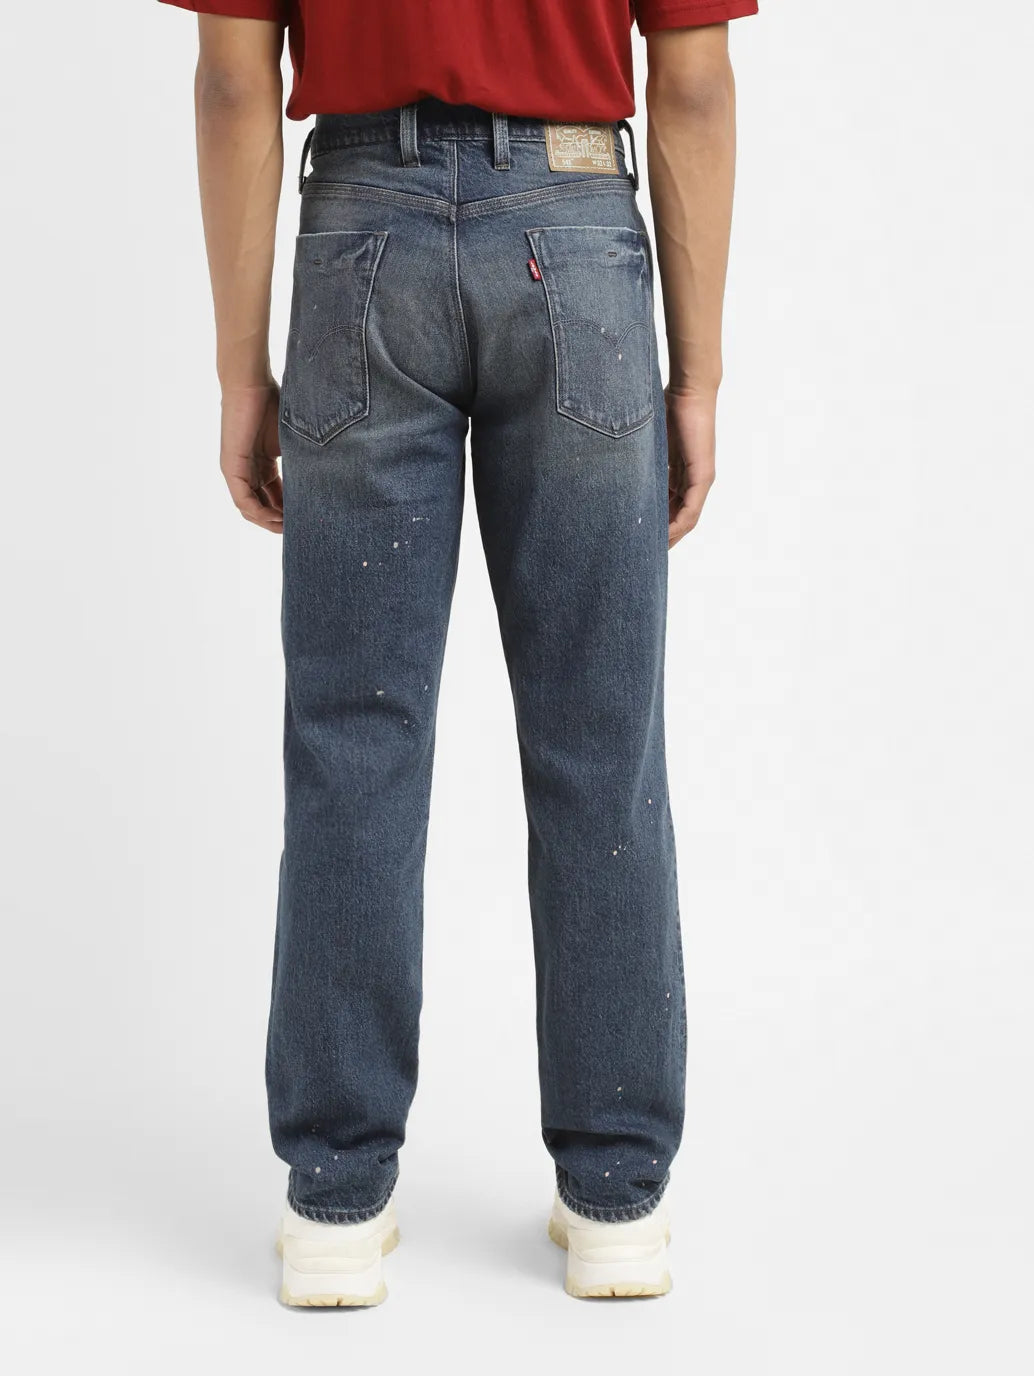 Men's 541 Mid Indigo Tapered Fit Jeans